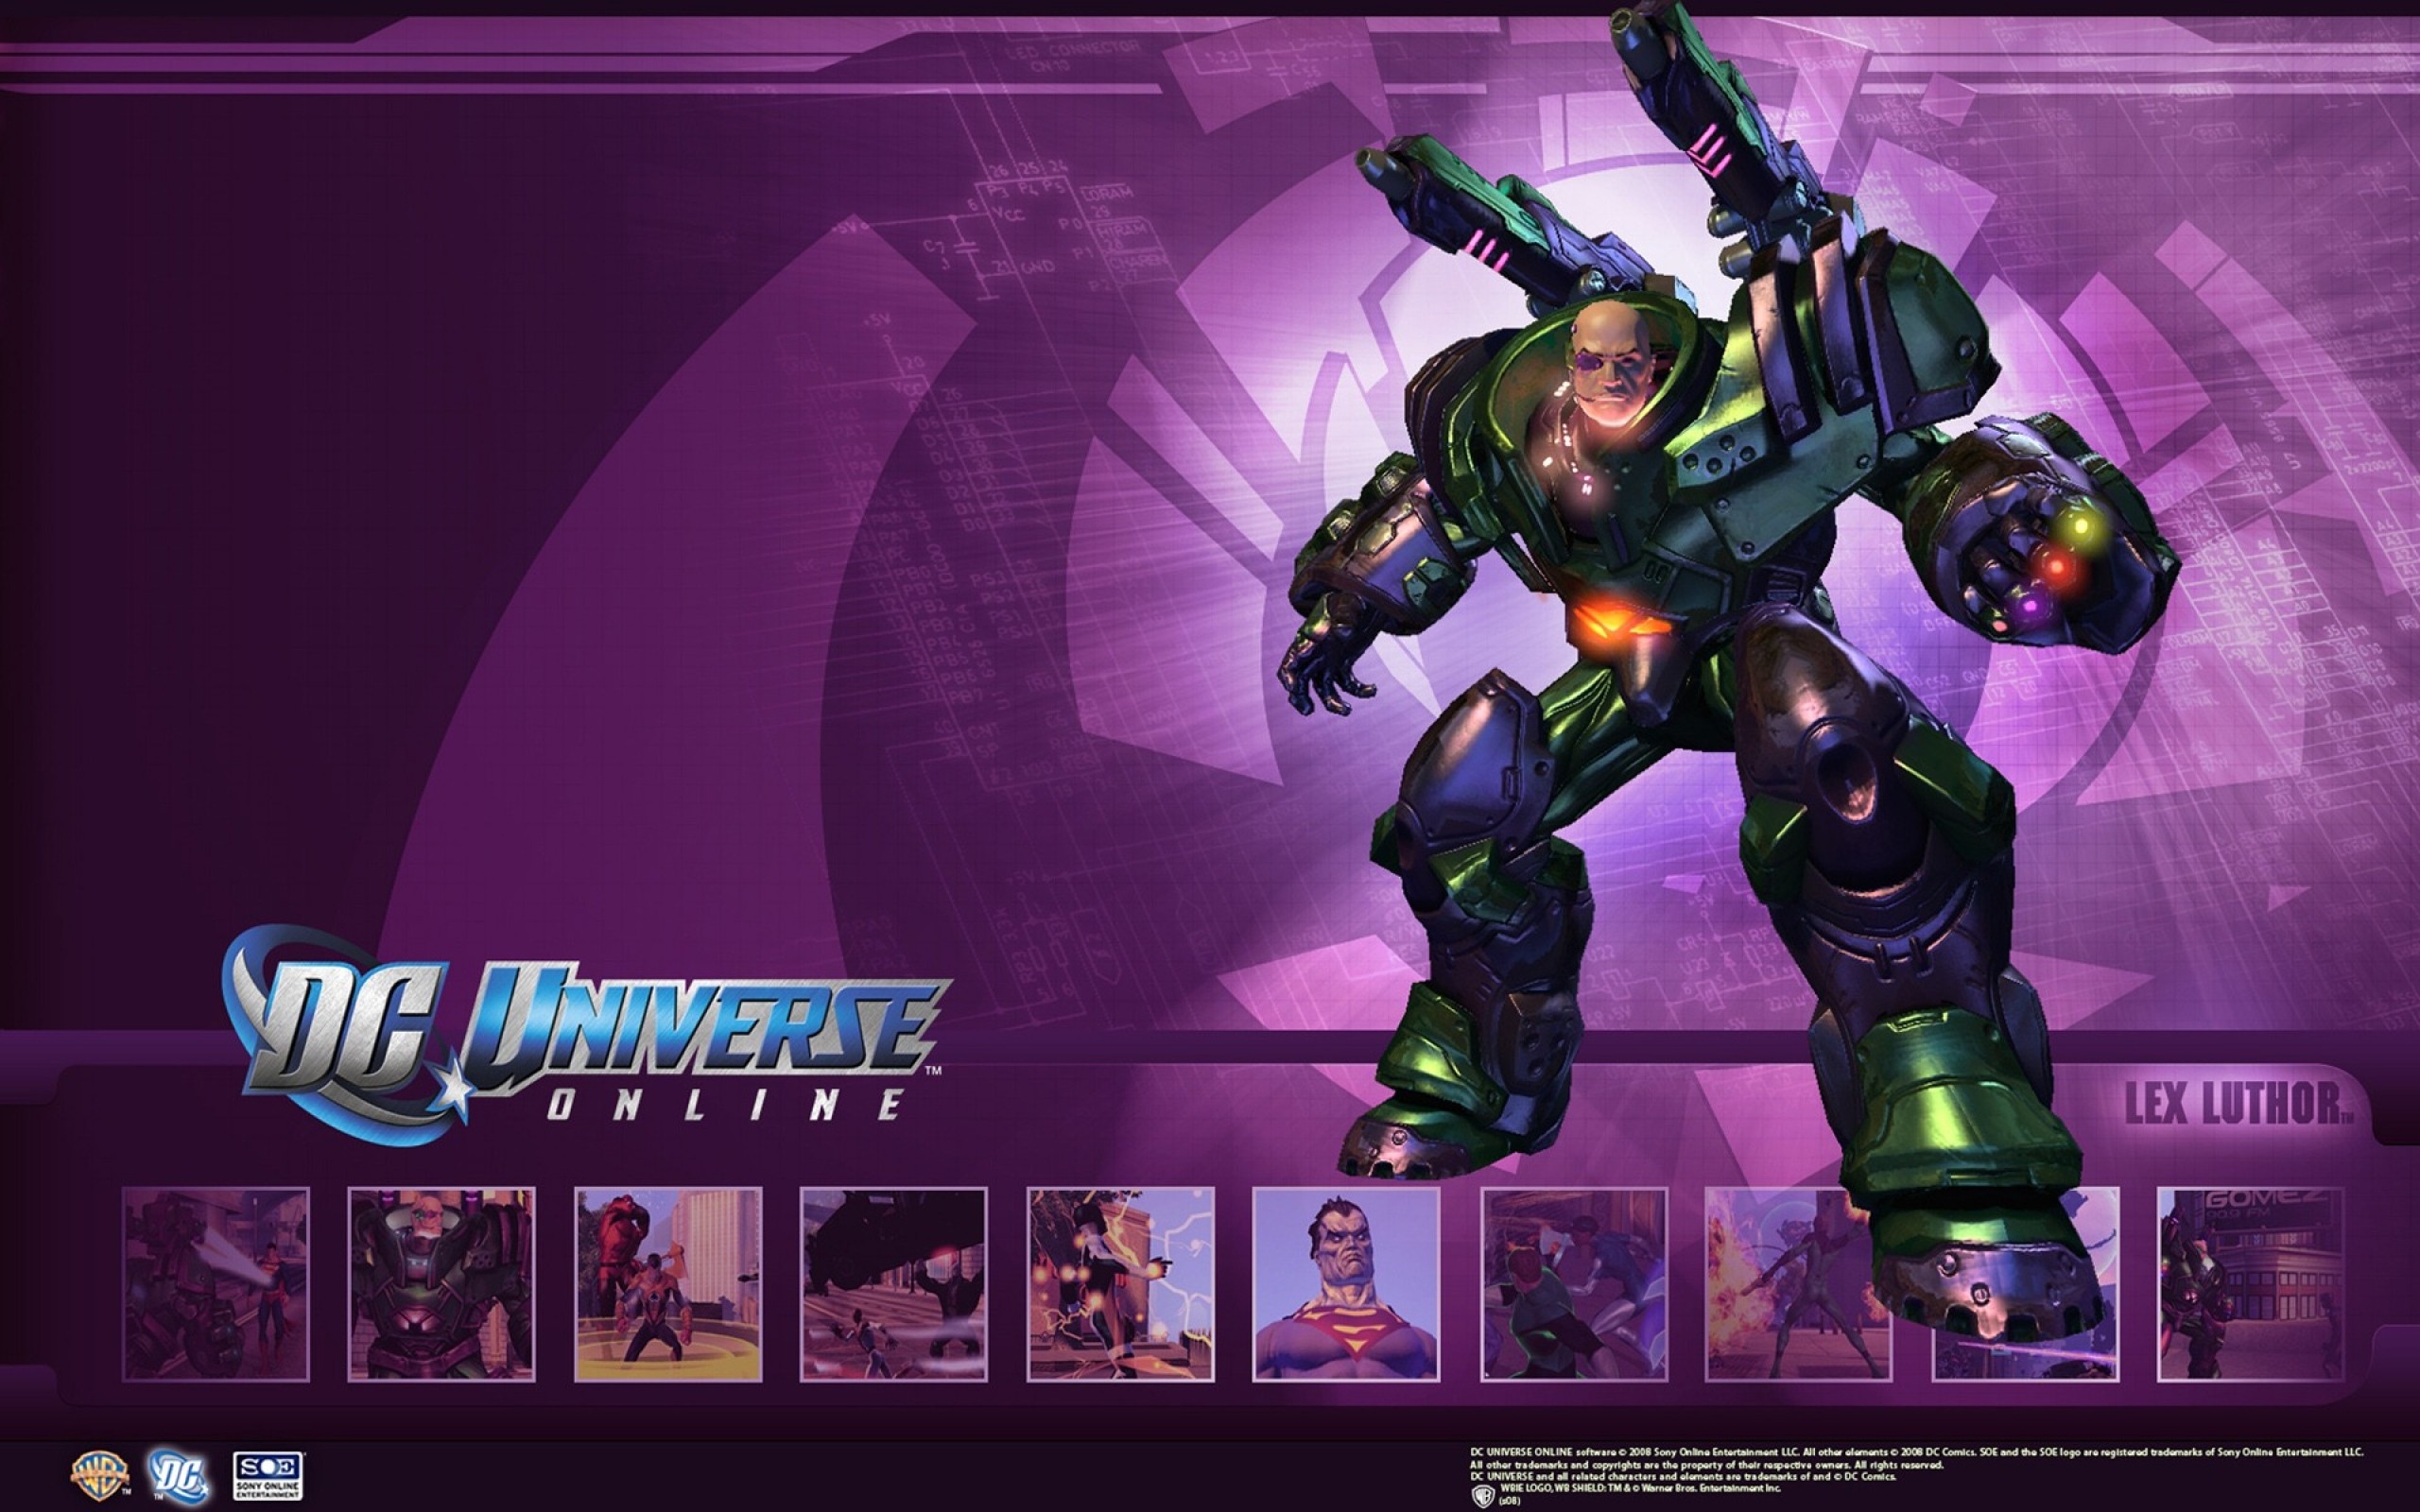 video game, dc universe online, lex luthor